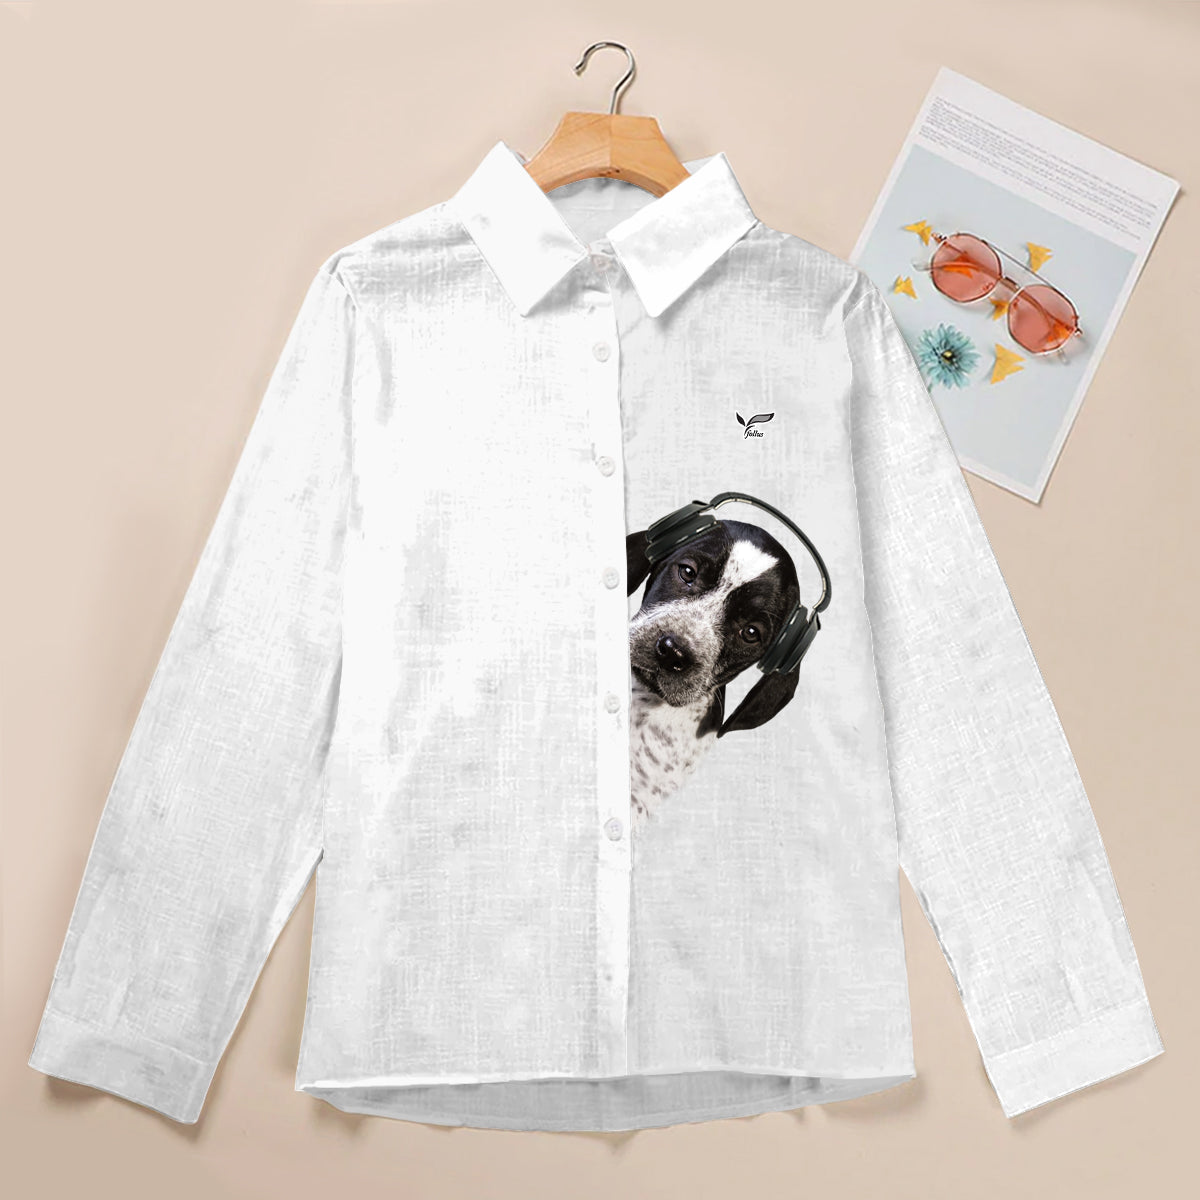 Great Music With German Shorthaired Pointer - Follus Women's Long-Sleeve Shirt V1